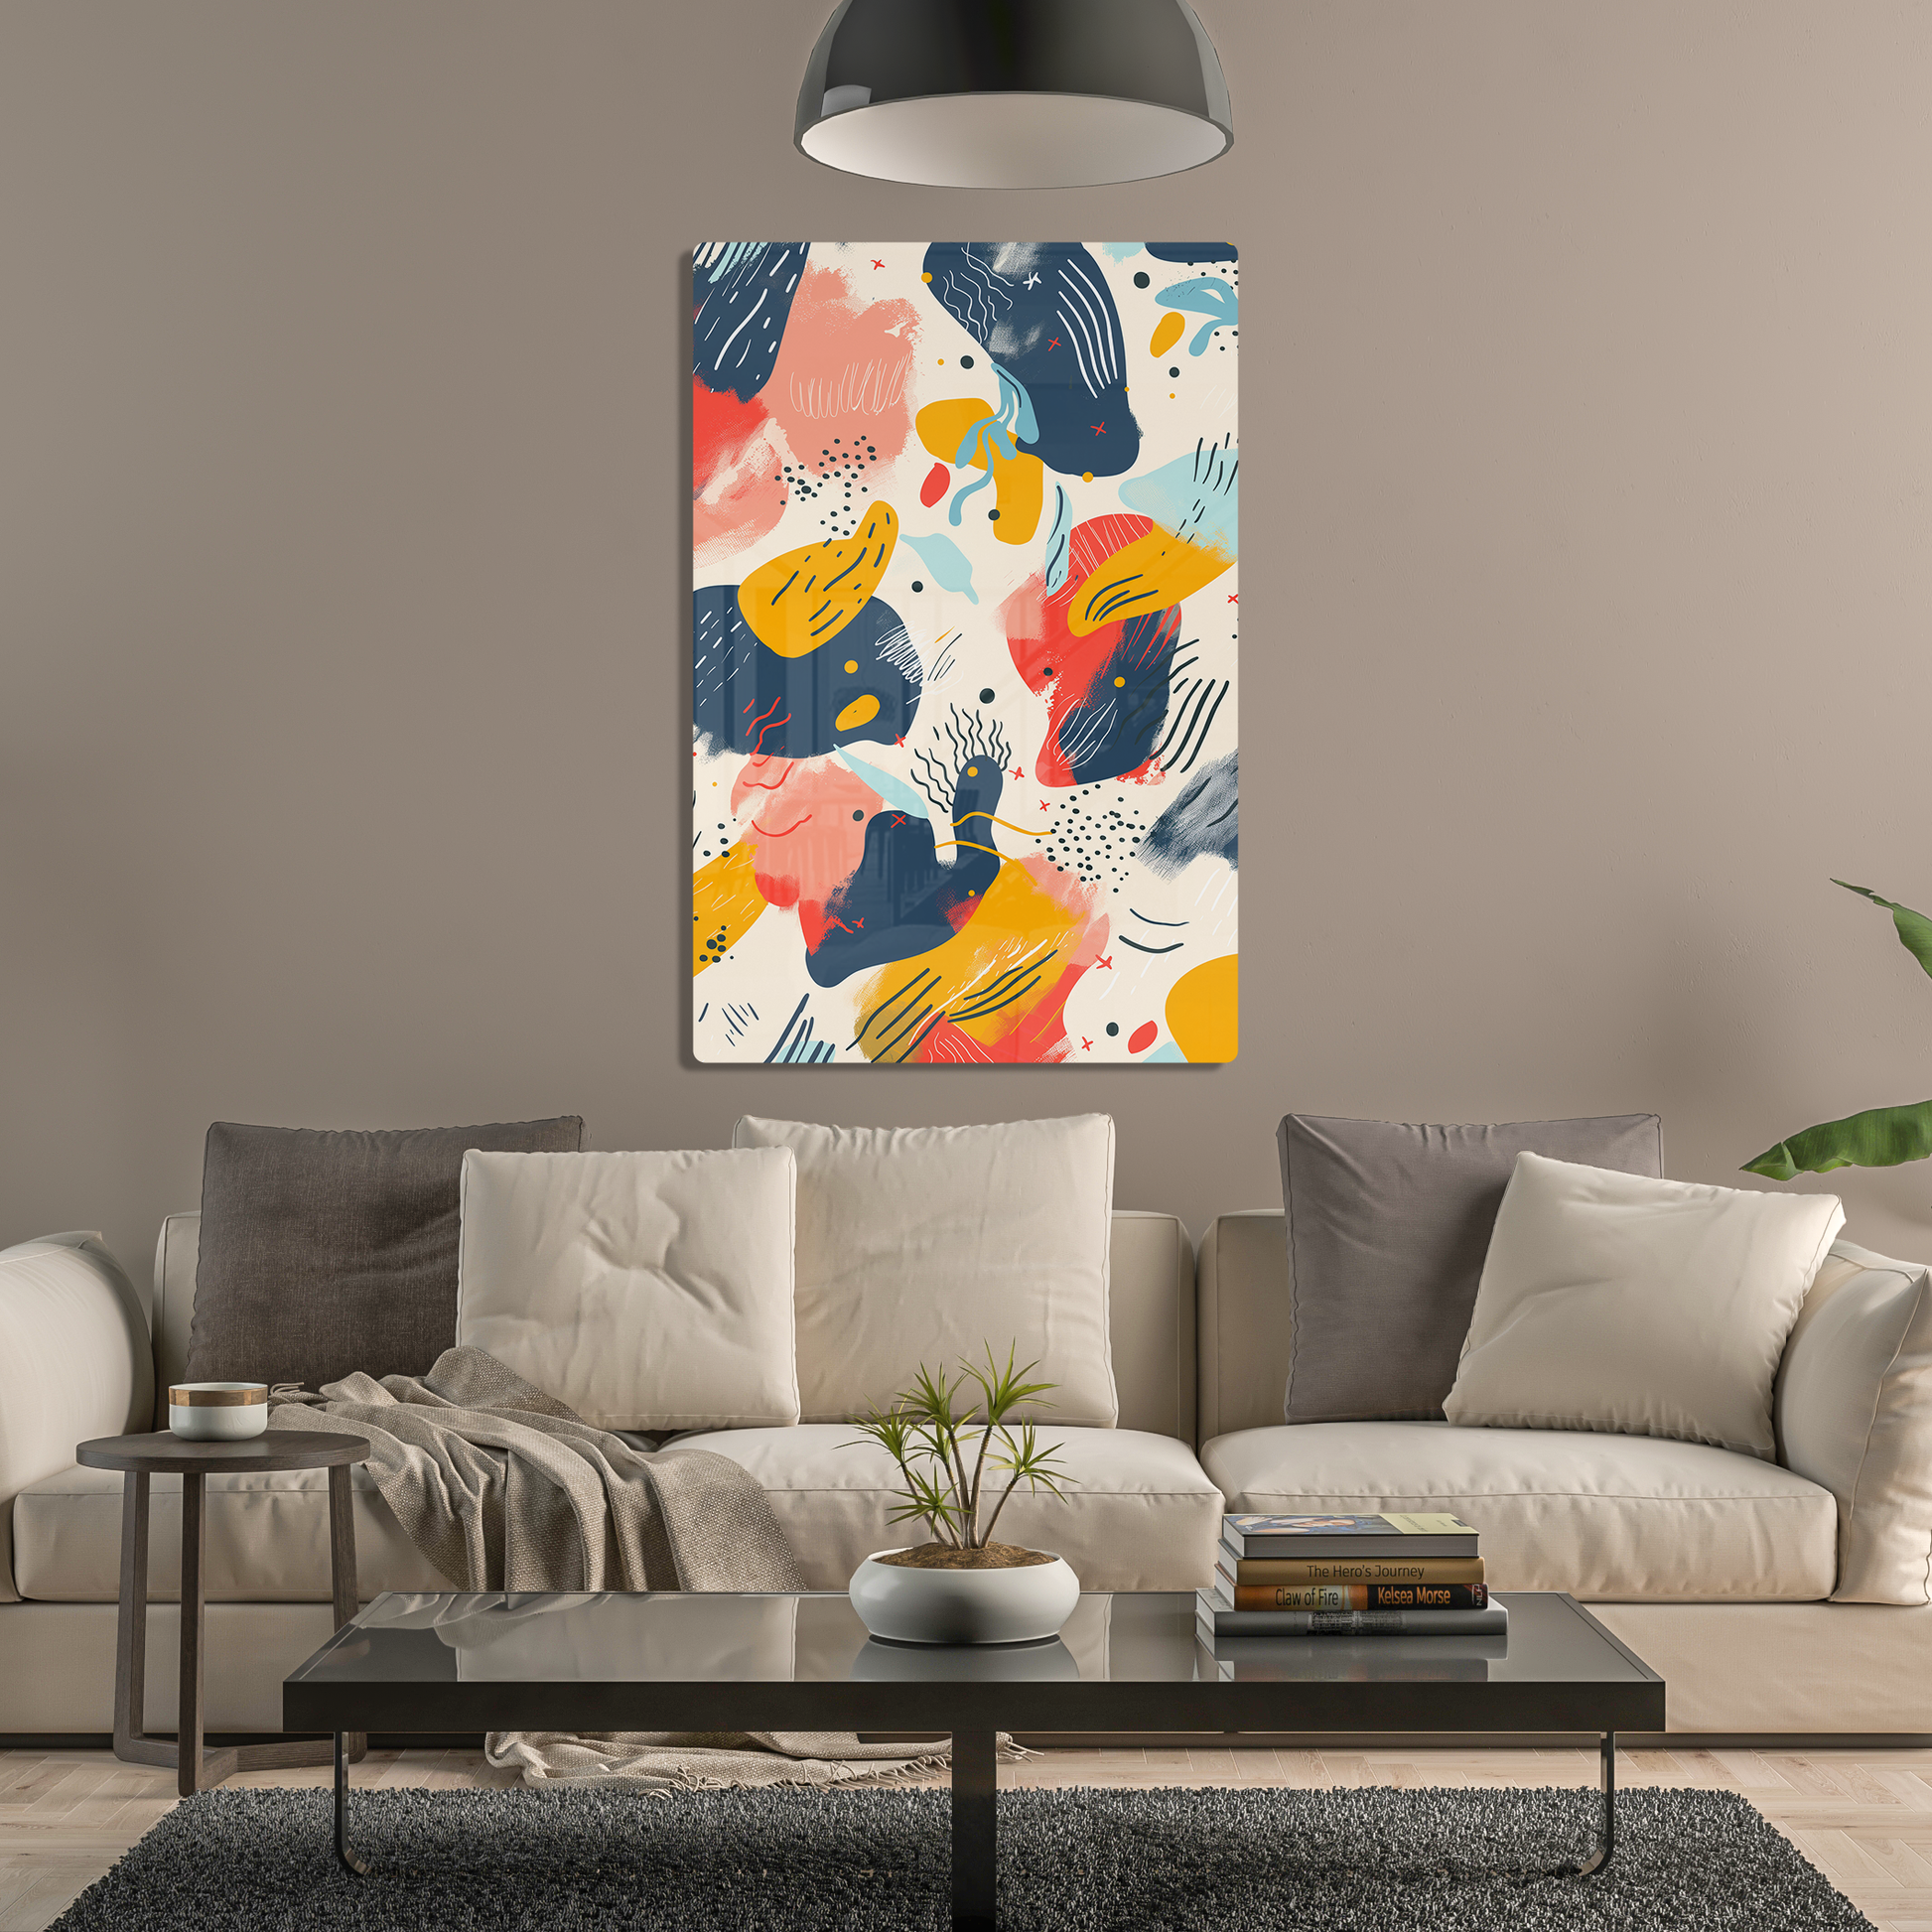 Abstract Play (Acrylic)Step into the universe with an Modern abstract art with bold splashes of color. Acrylic art from RimaGallery. Experience the cosmos in your home with vibrant, ethicaRimaGallery